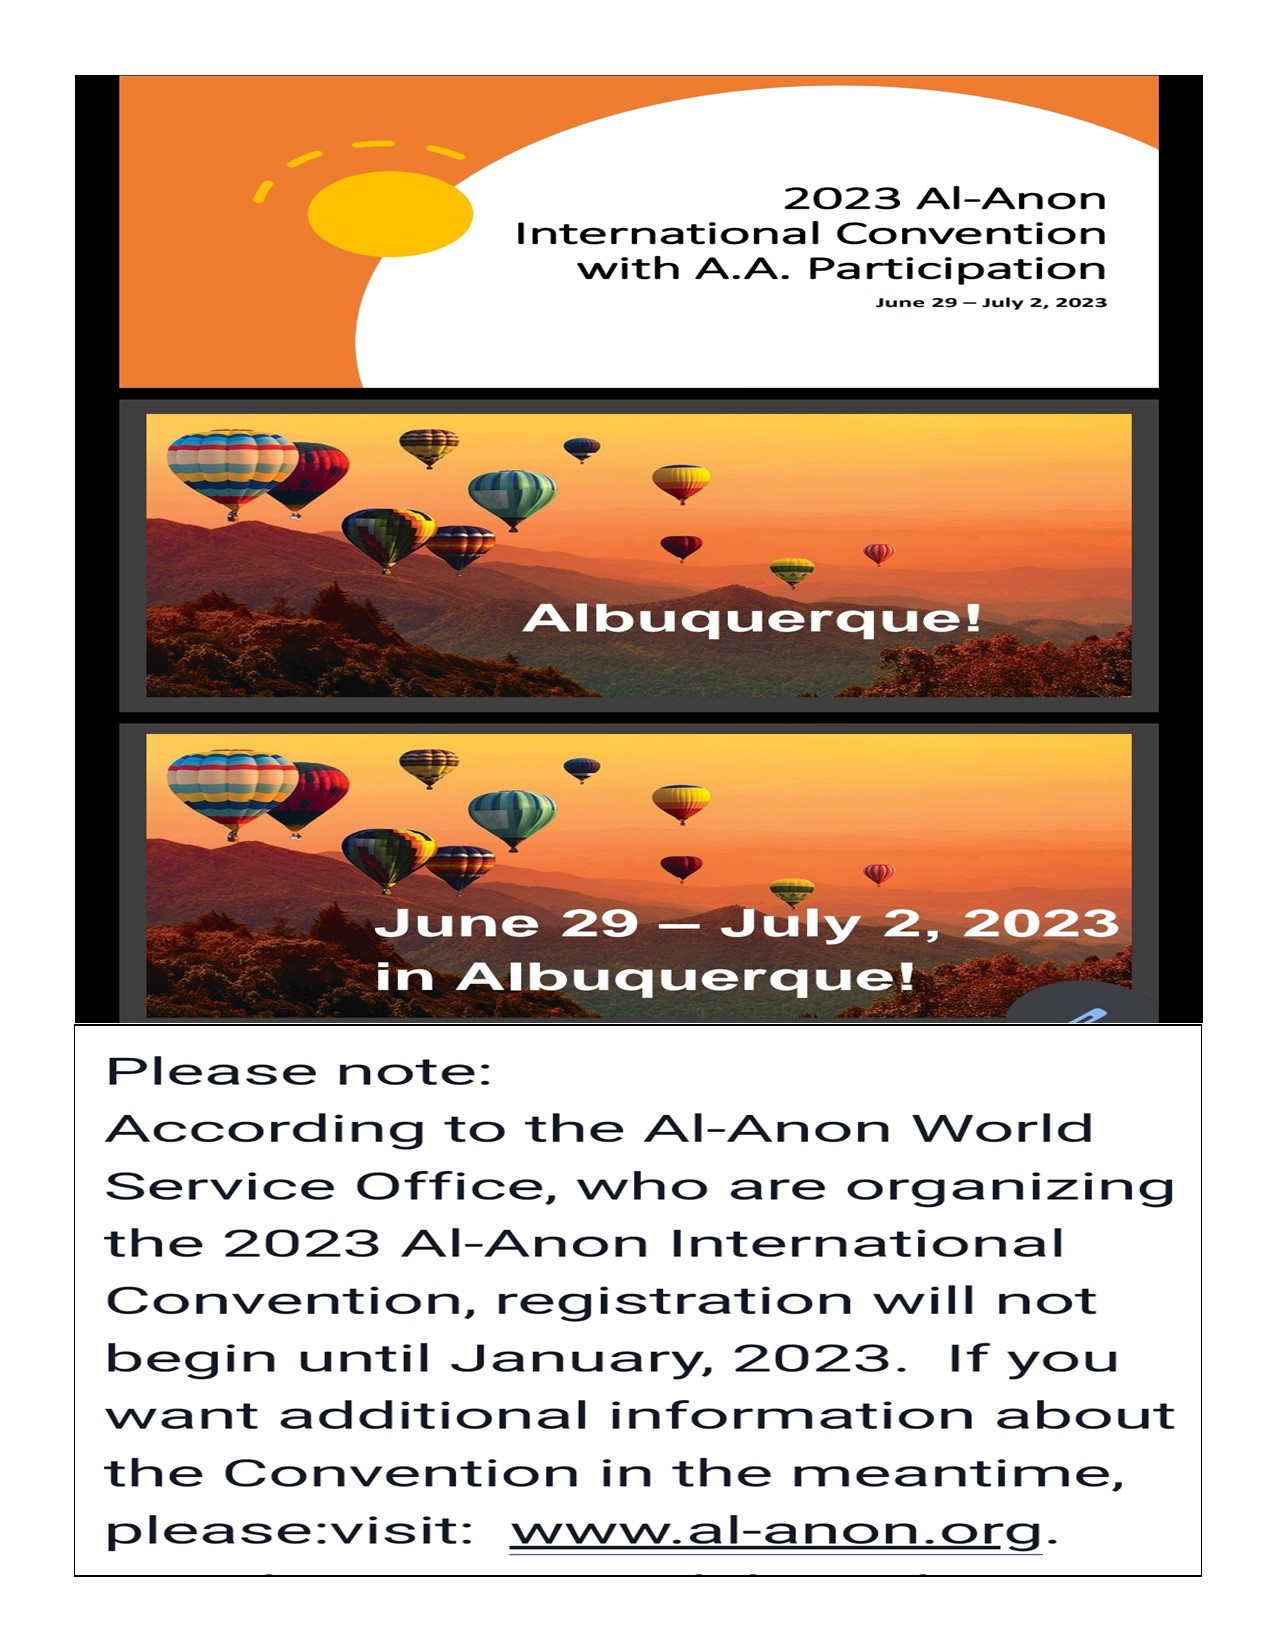 2023 AlAnon International Convention with A.A. Participation